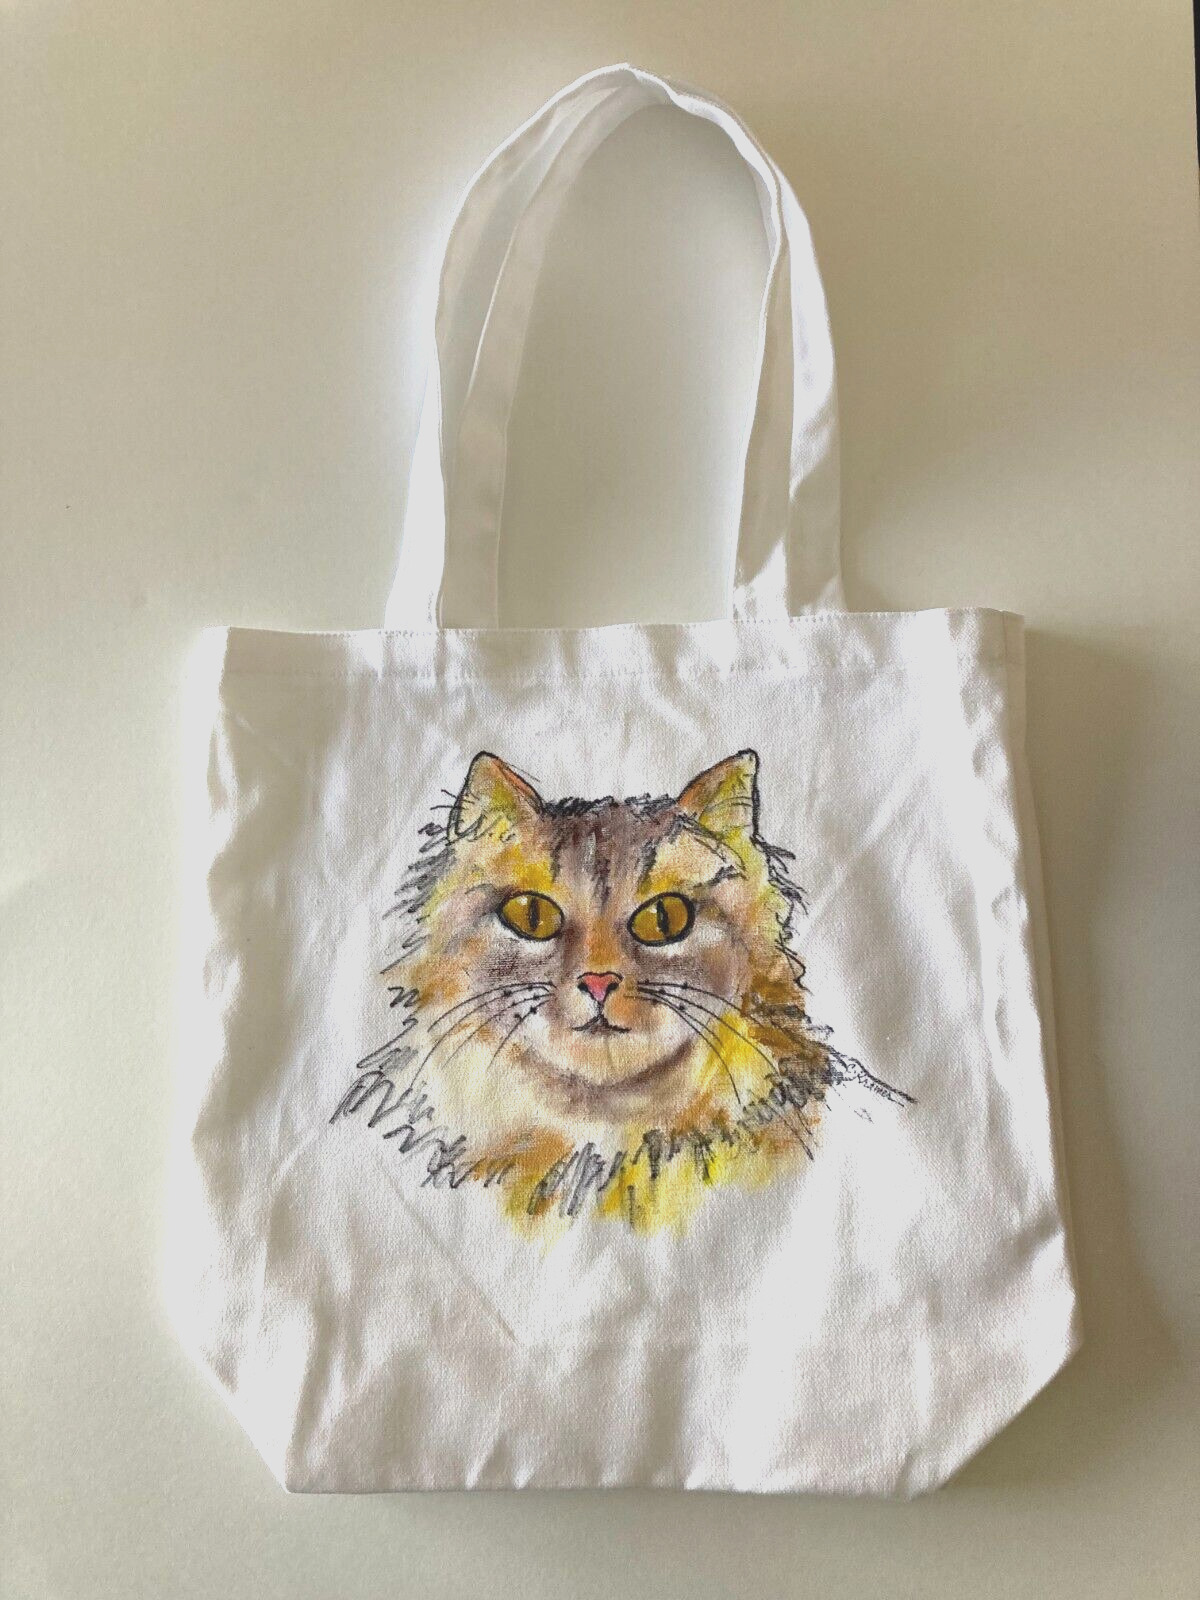 New Hand Painted Cat ~ Kitty White Canvas Tote Bag Artist Signed Original Art